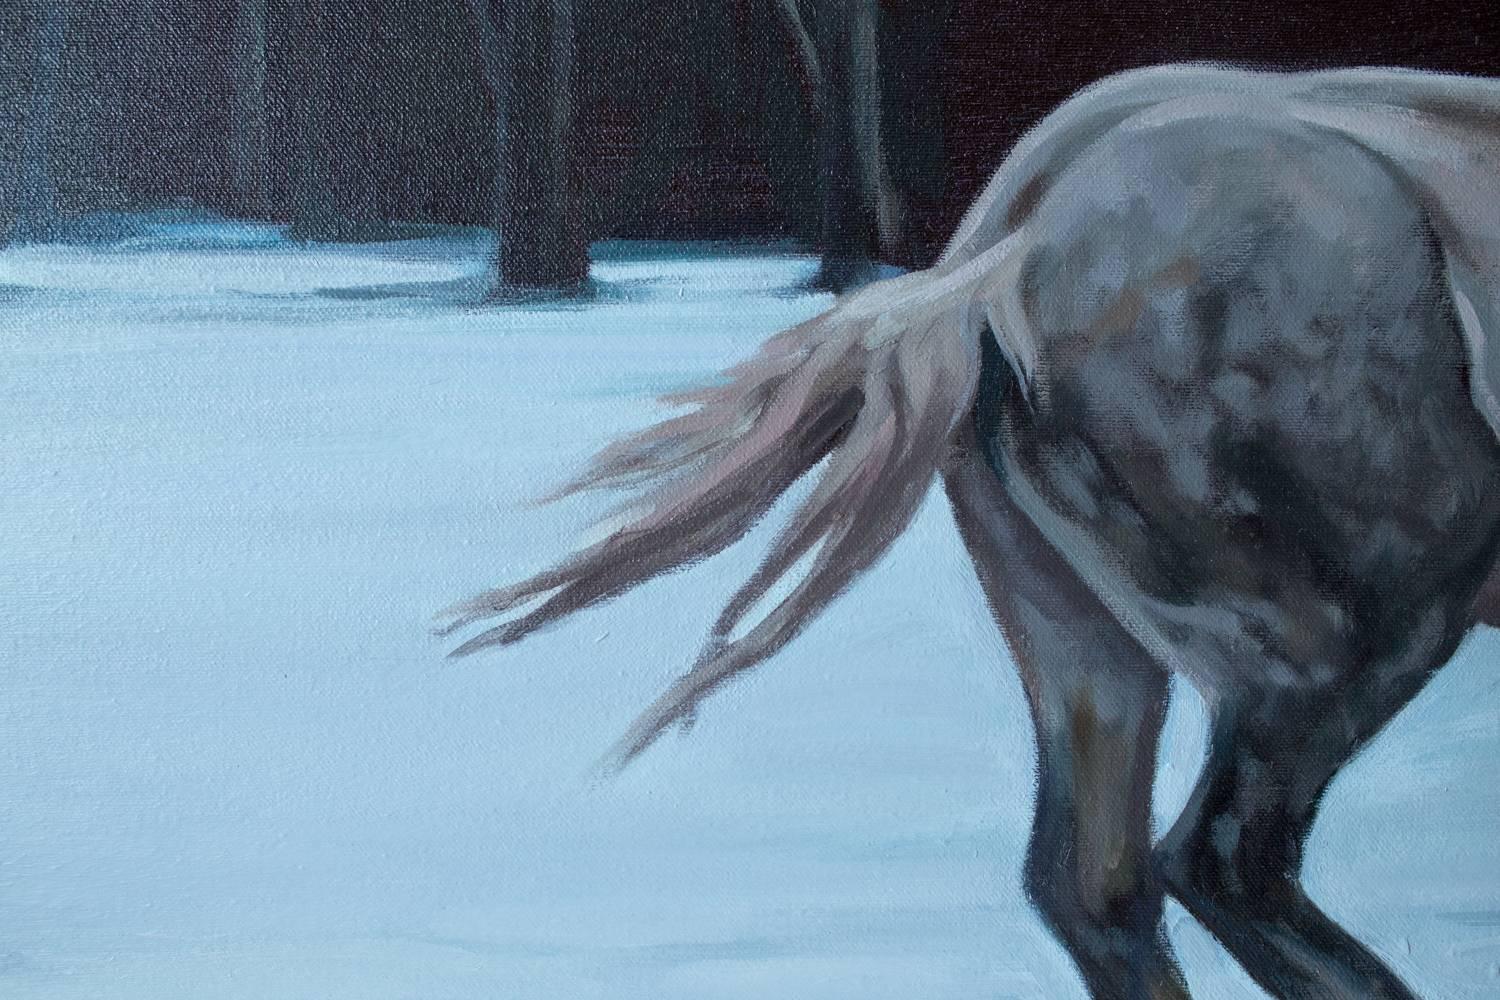 This painting of a horse in a snowy landscape titled 